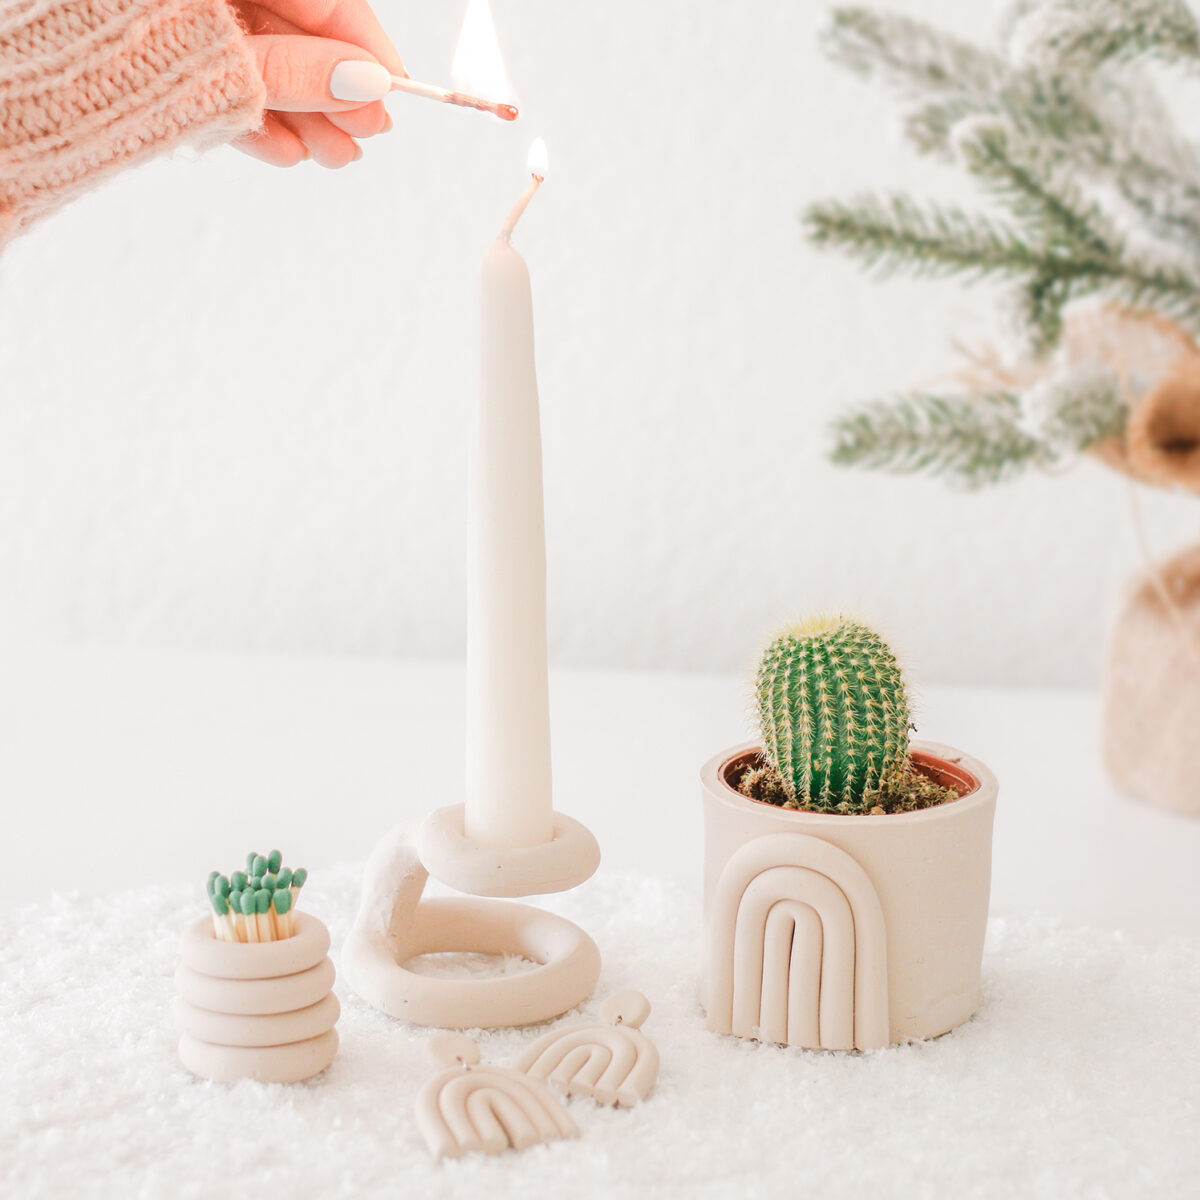 3 DIY Gifts Made of Clay